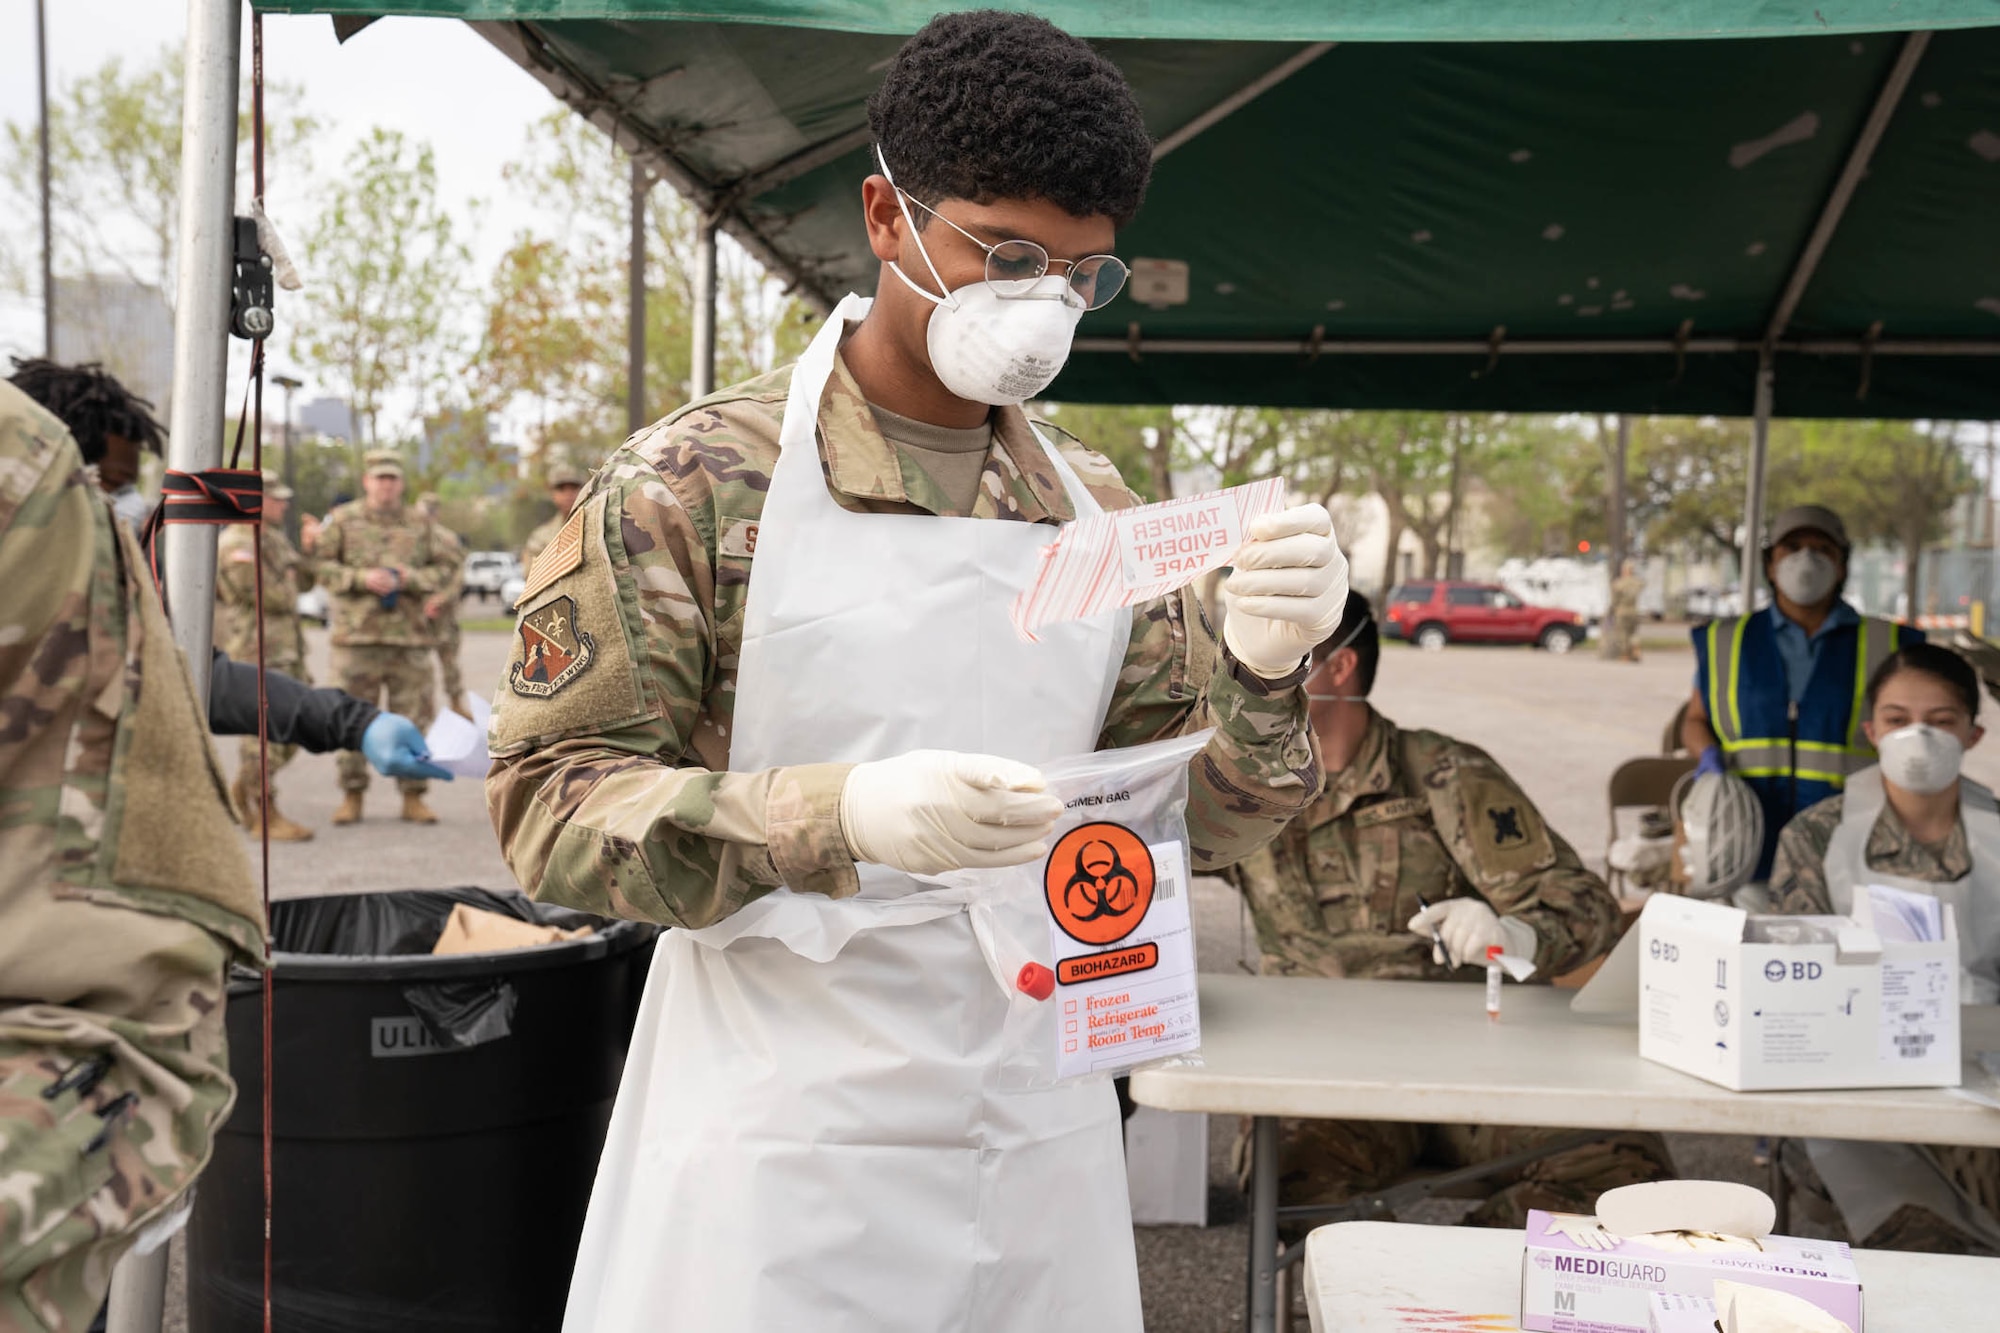 Louisiana National Guard Soldiers and Airmen test first responders for COVID-19 infections at Louis Armstrong Park, New Orleans, Louisiana, March 20, 2020. The testing site is one of three across New Orleans and Jefferson Parishes and will soon open to the general public. (U.S. Army National Guard photo by Staff Sgt. Josiah Pugh)